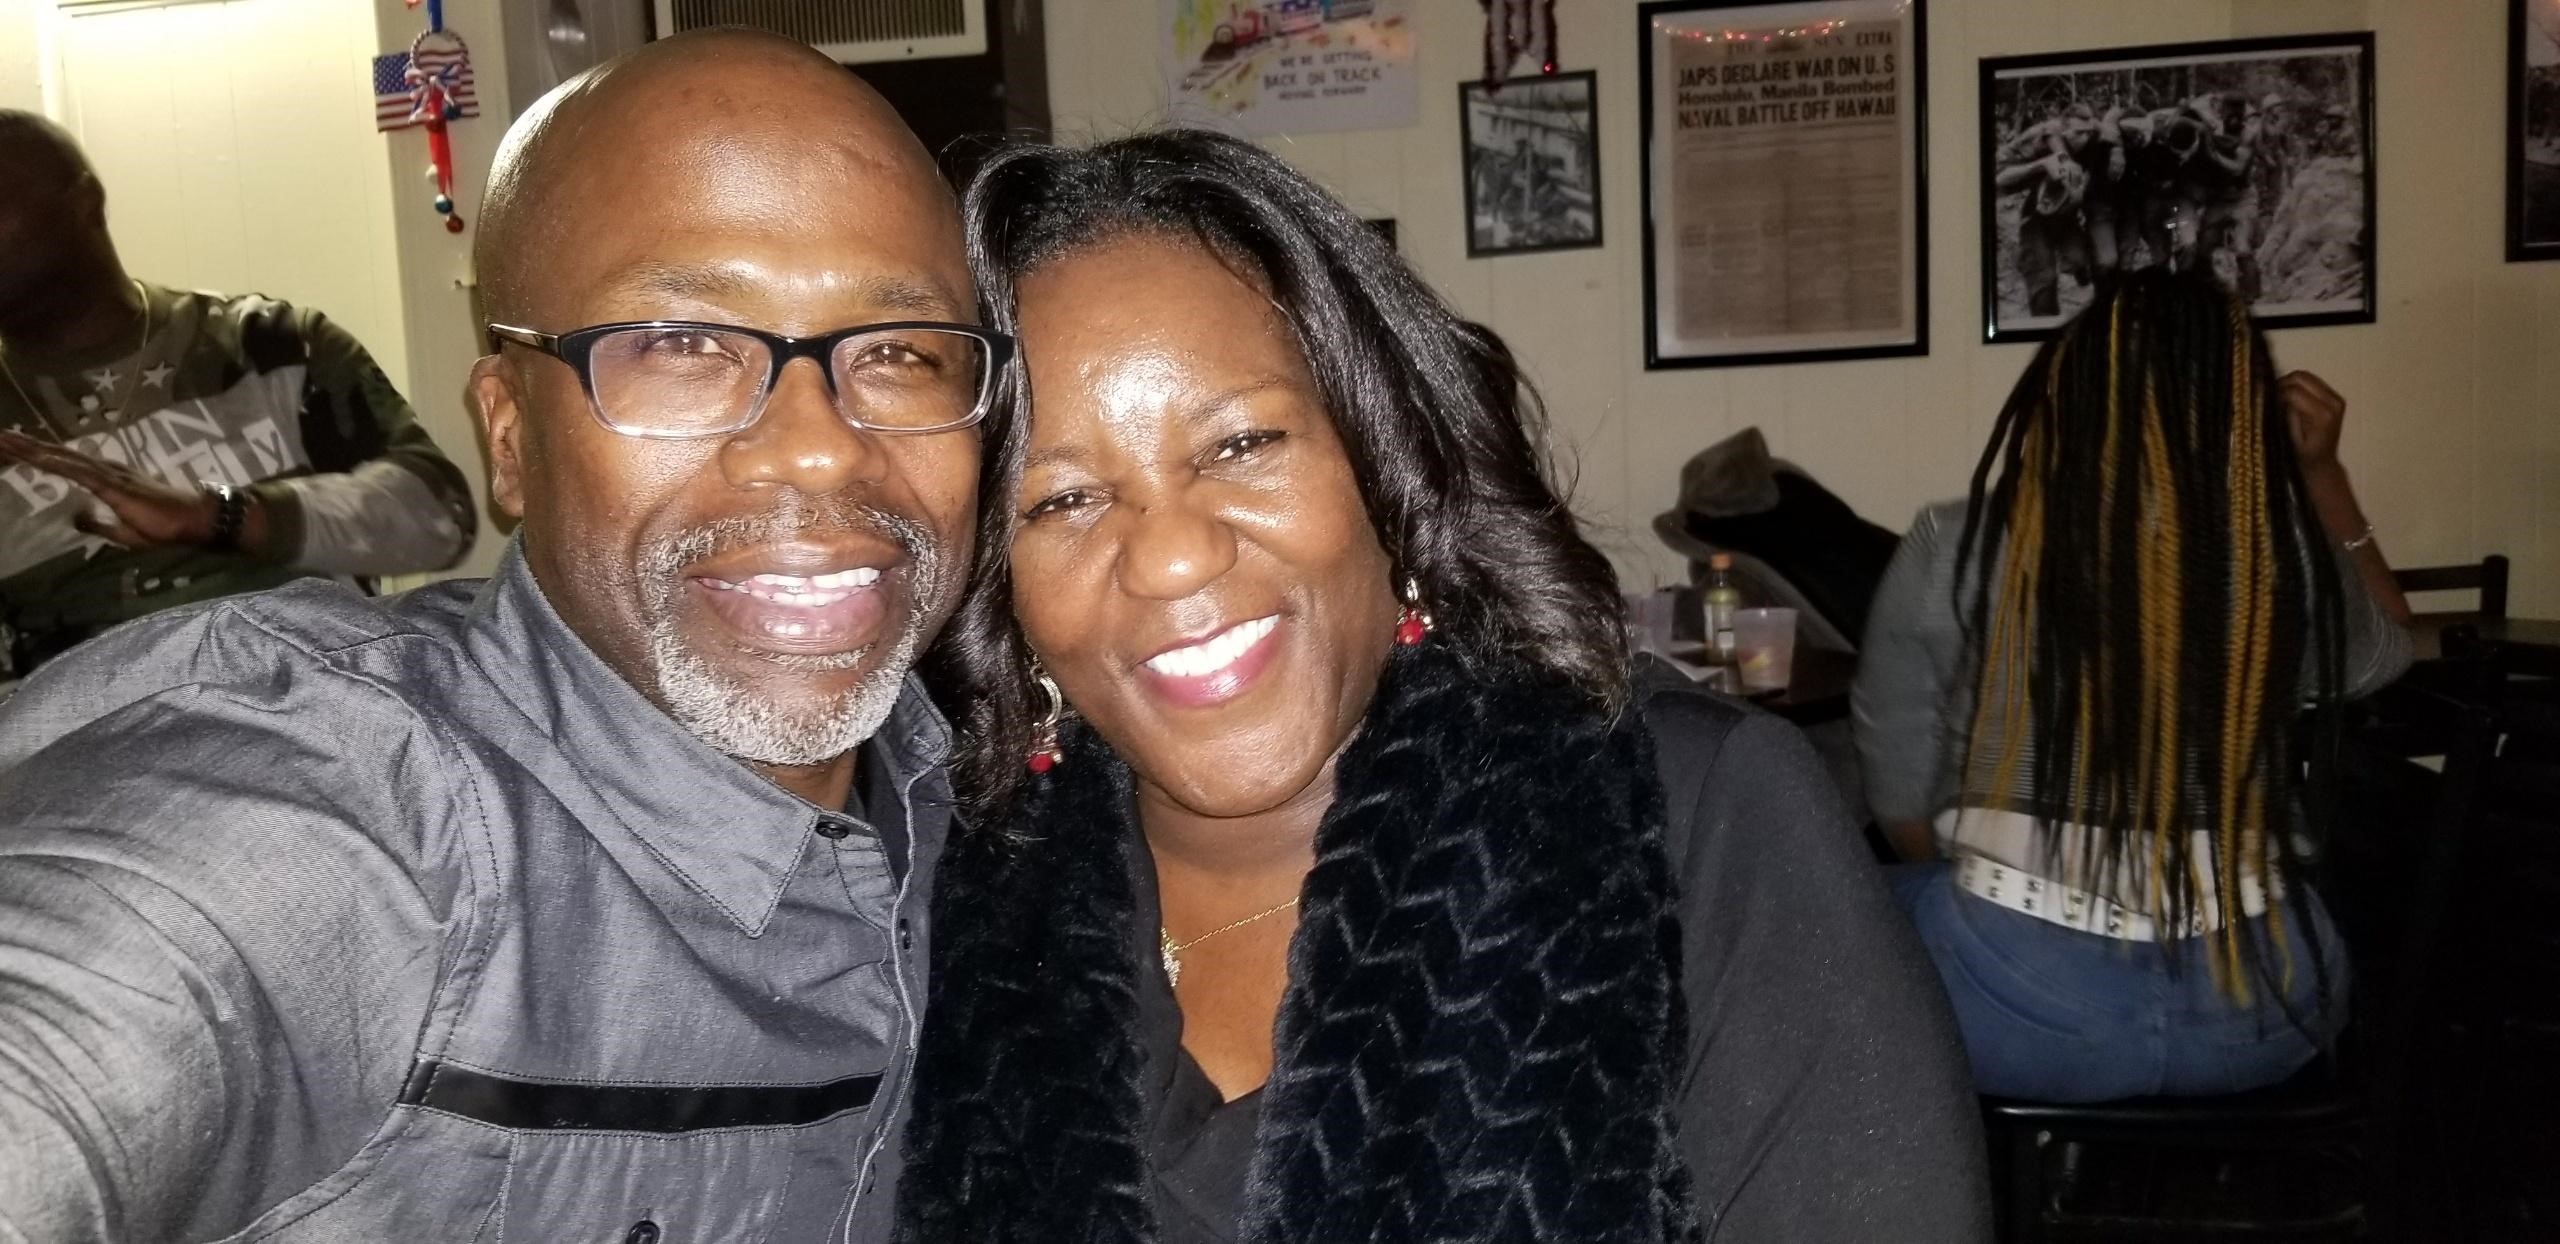 PHOTO: Keith Smith of poses with his wife, Jacquelyn Smith, who was stabbed to death by a panhandler in Baltimore on Dec. 1, 2018.